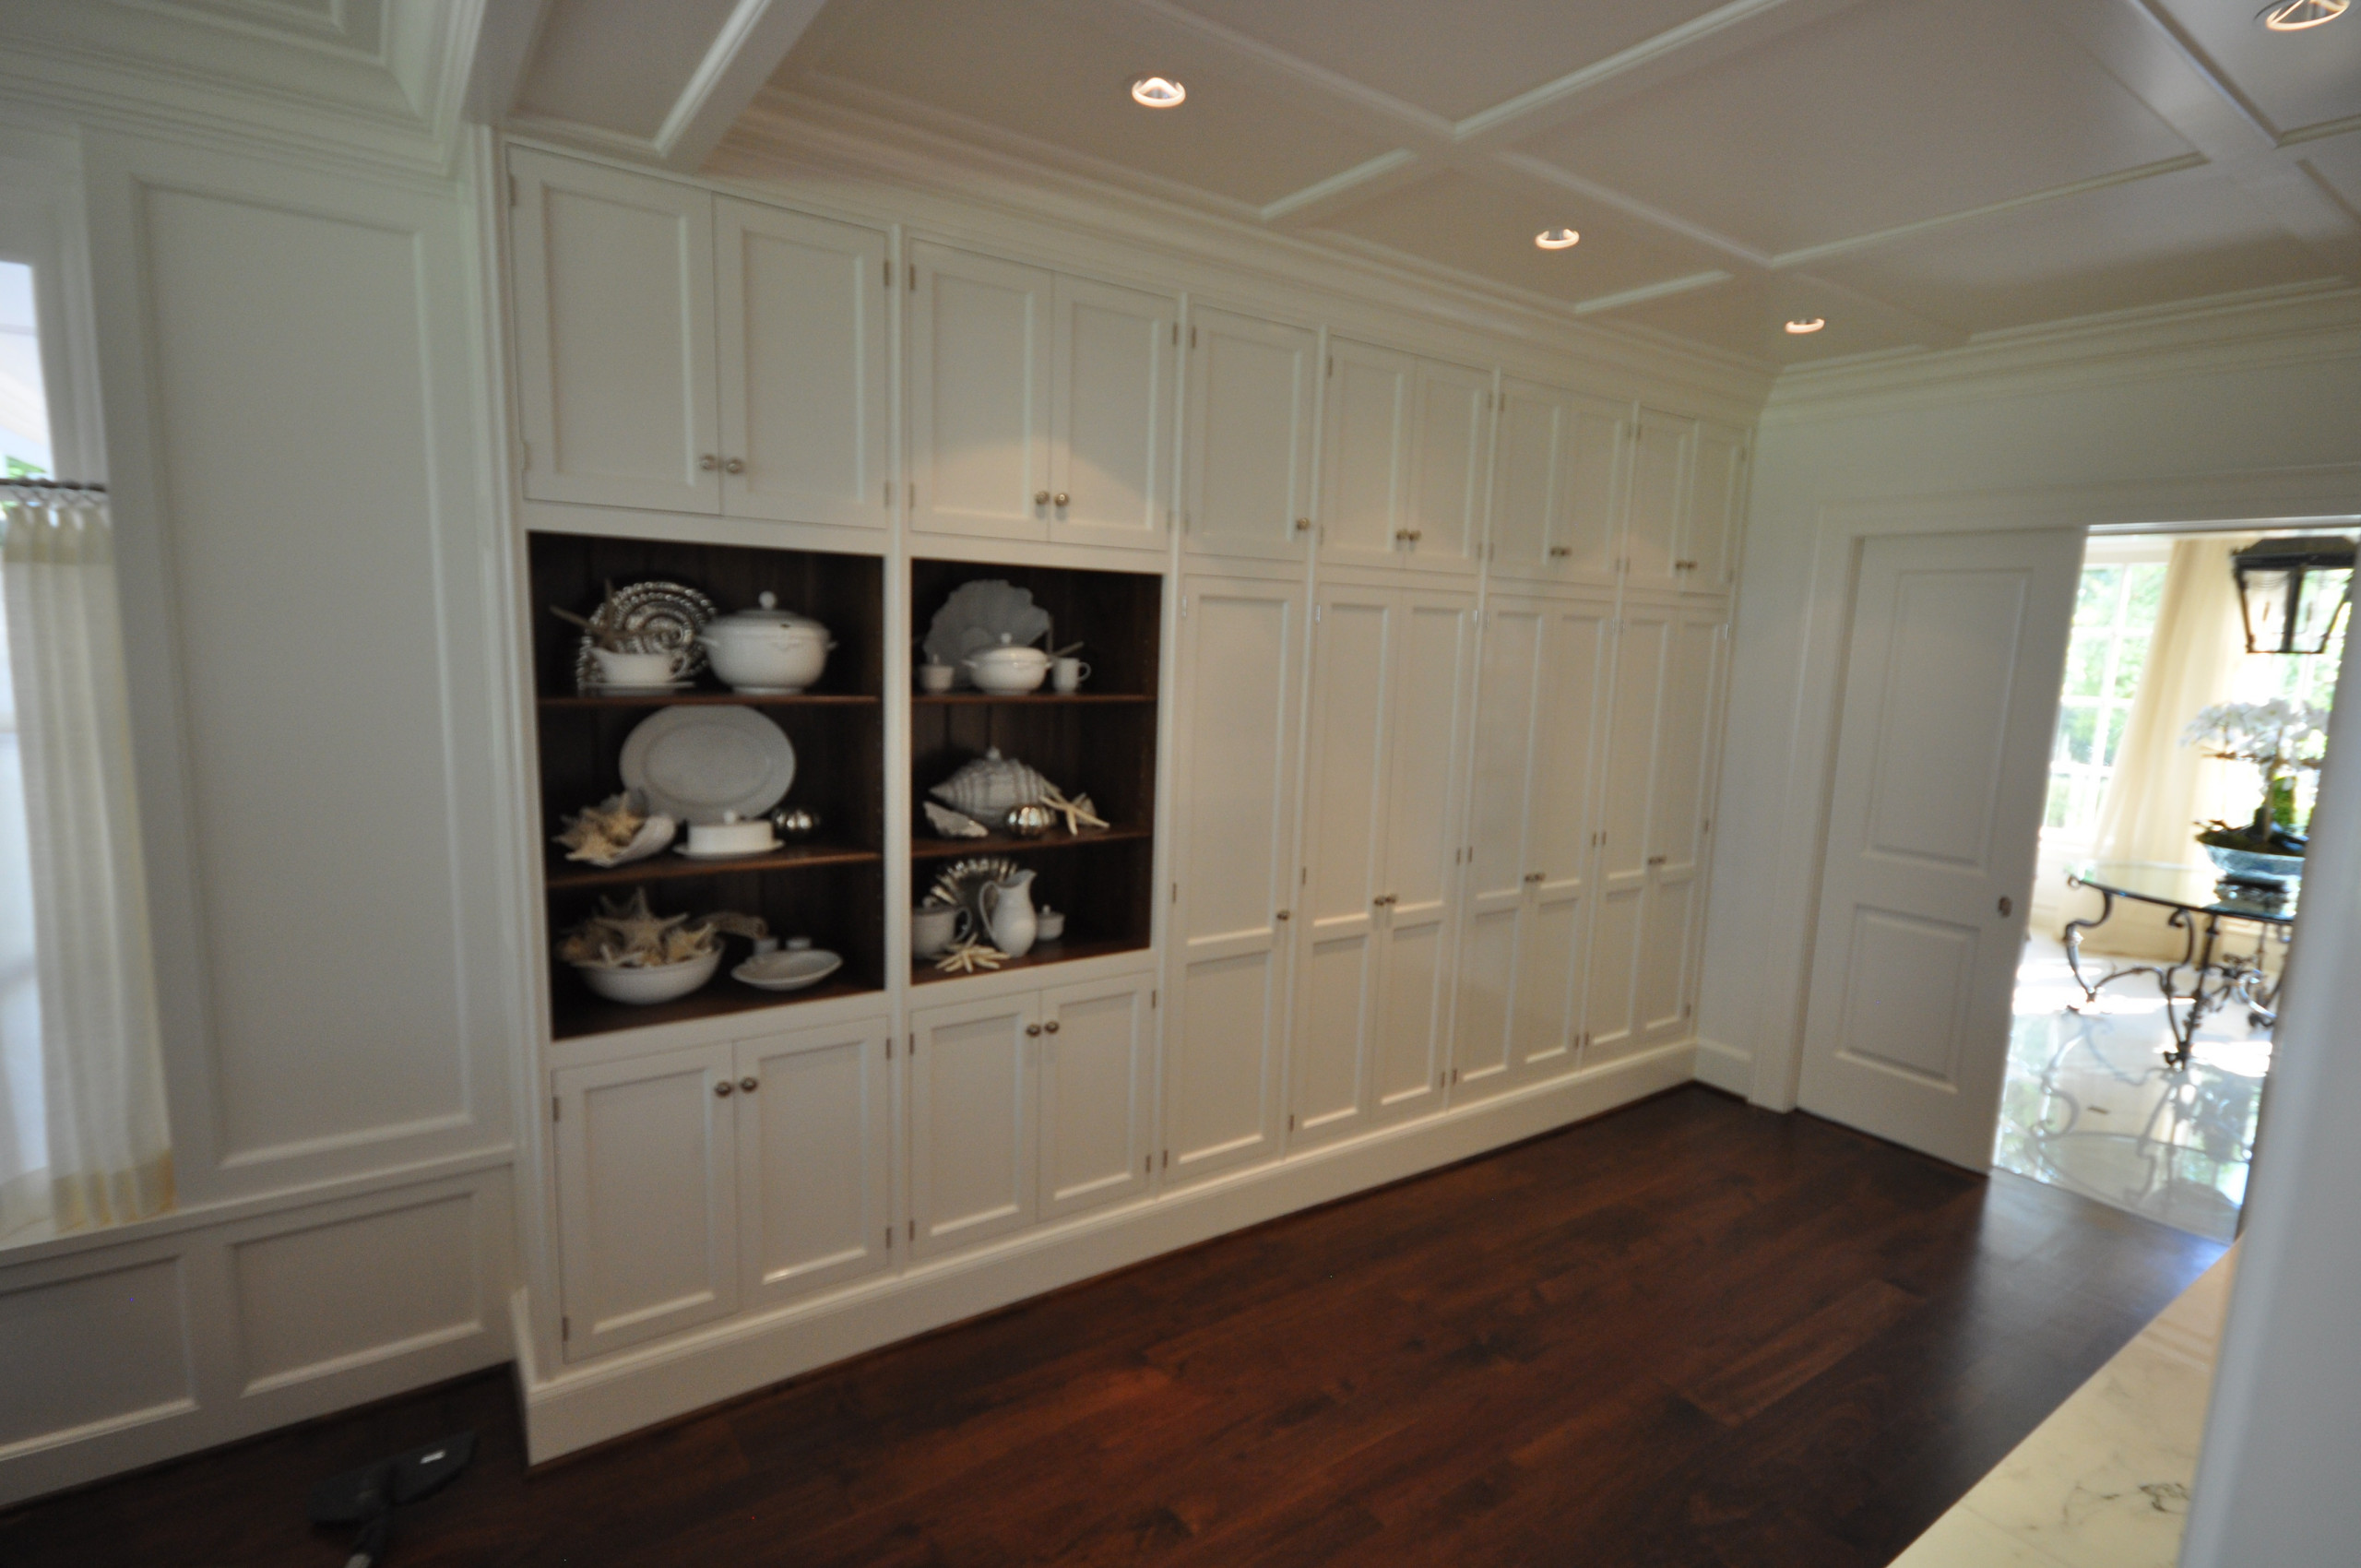 Signature Kitchen with custom made hardware, hand painted with high gloss paint.